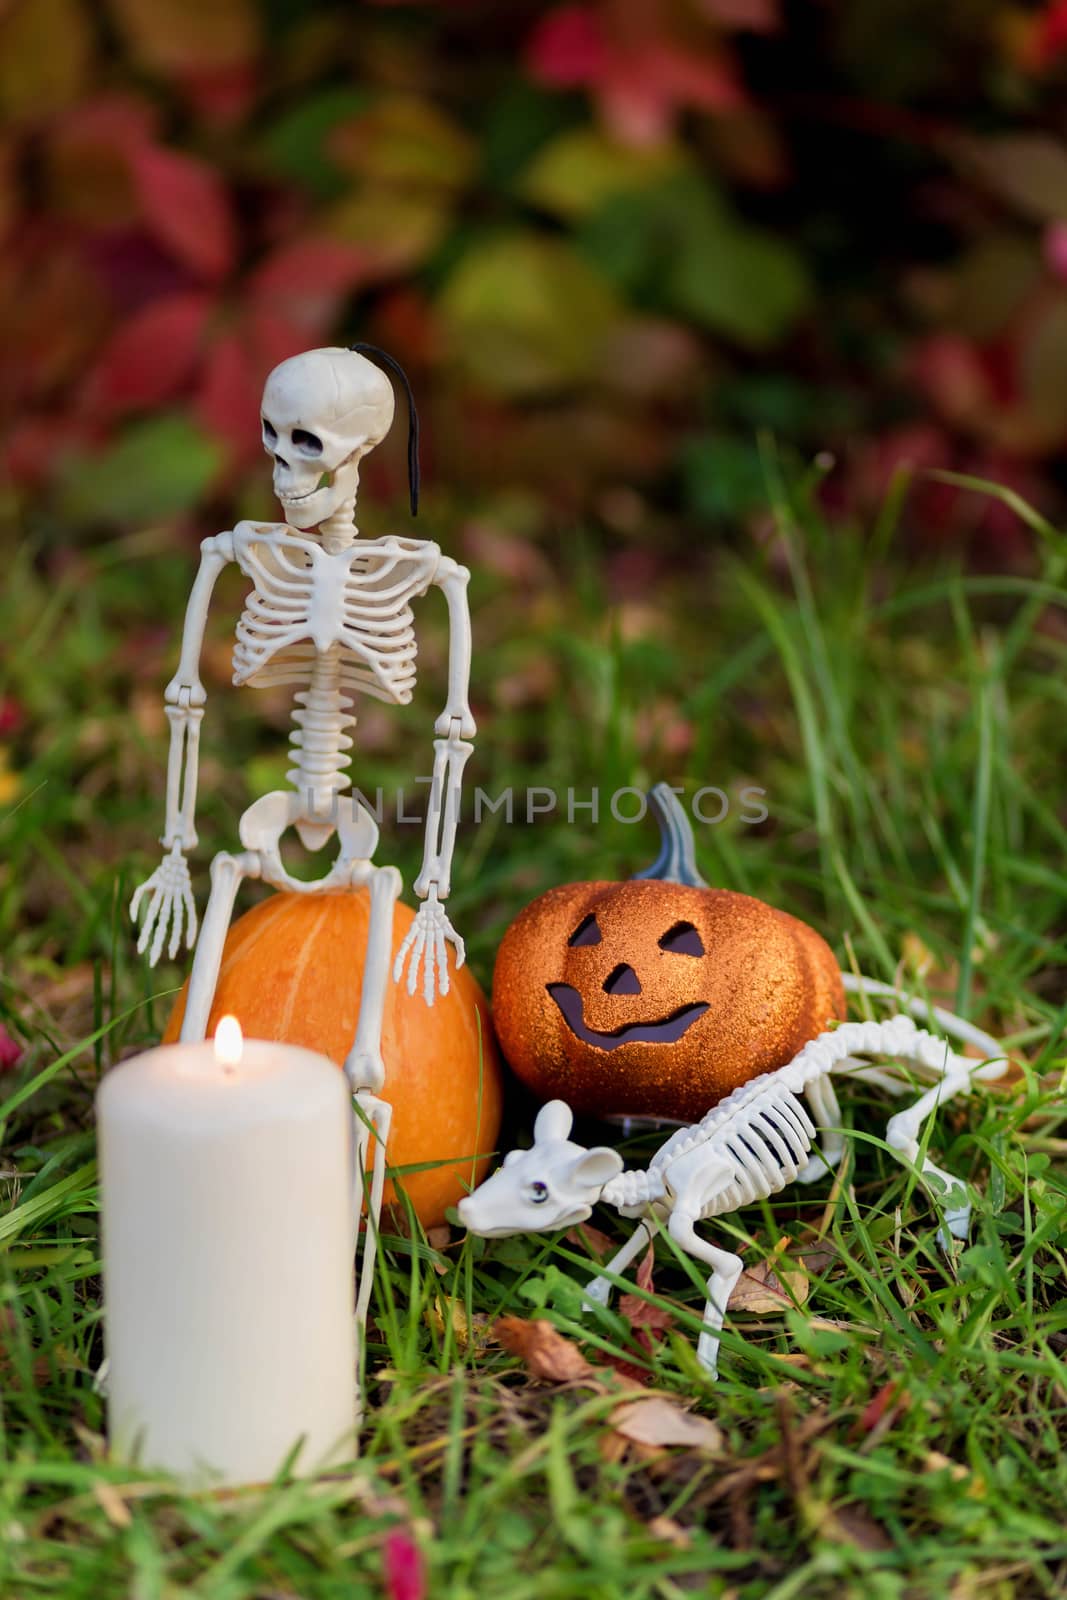 .Still life of skeletons and pumpkins against the background of autumn foliage in the garden for the halloween holiday